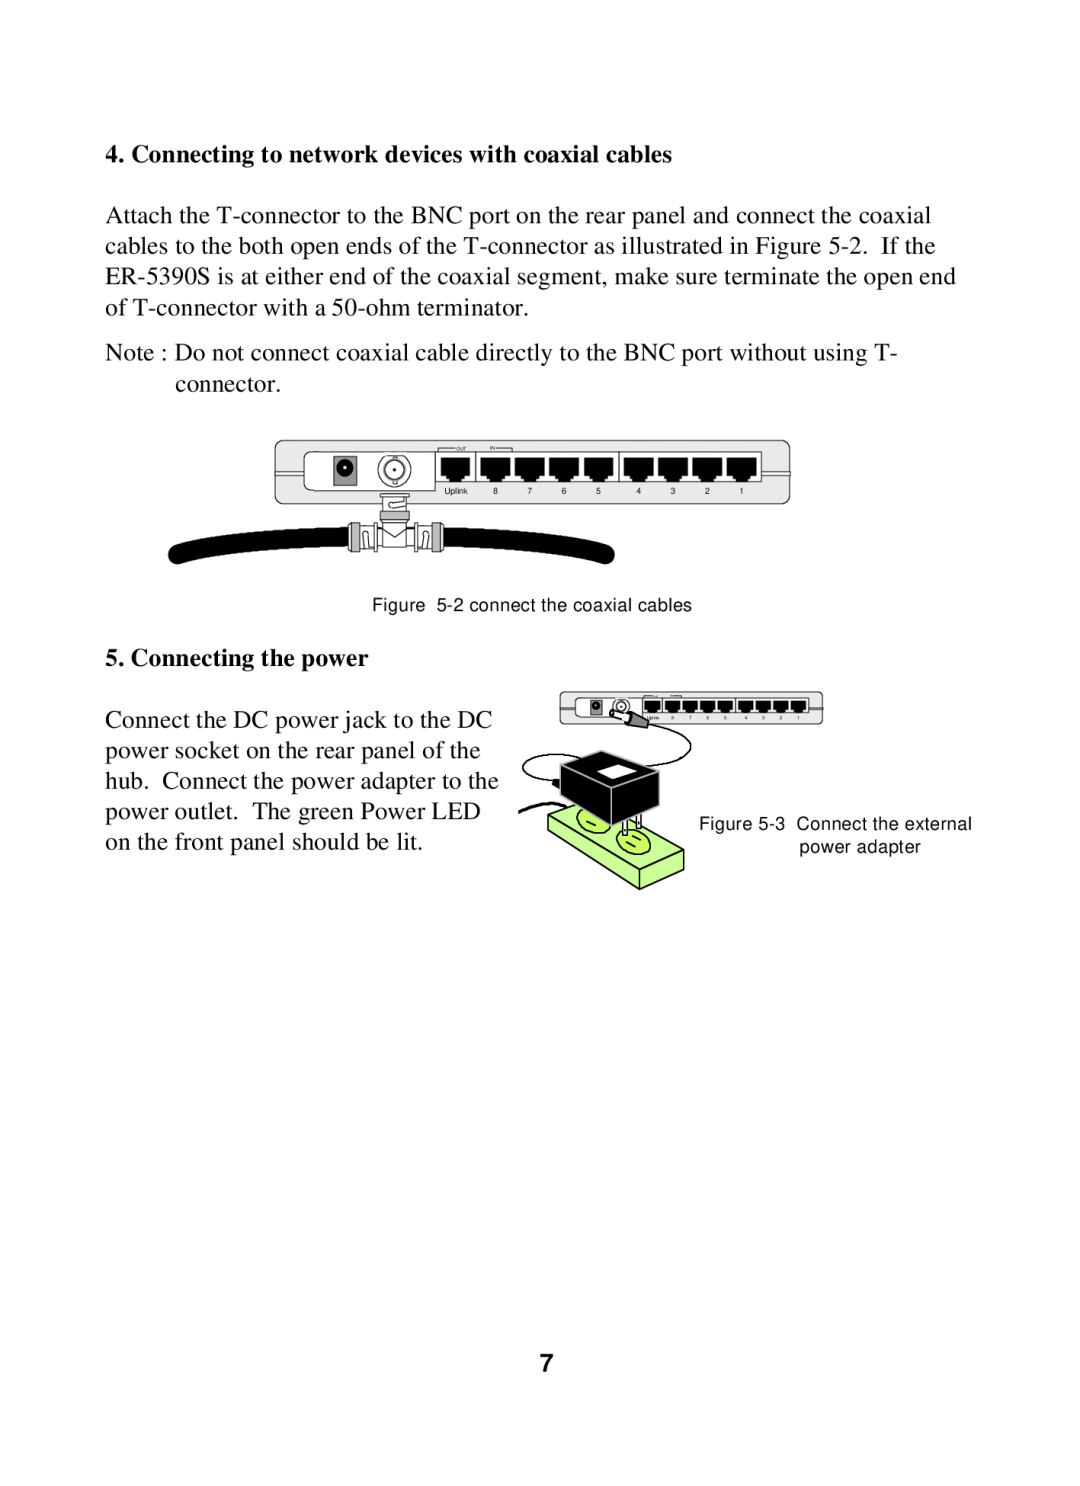 Edimax Technology ER-5390S user manual Connecting to network devices with coaxial cables, Connecting the power 